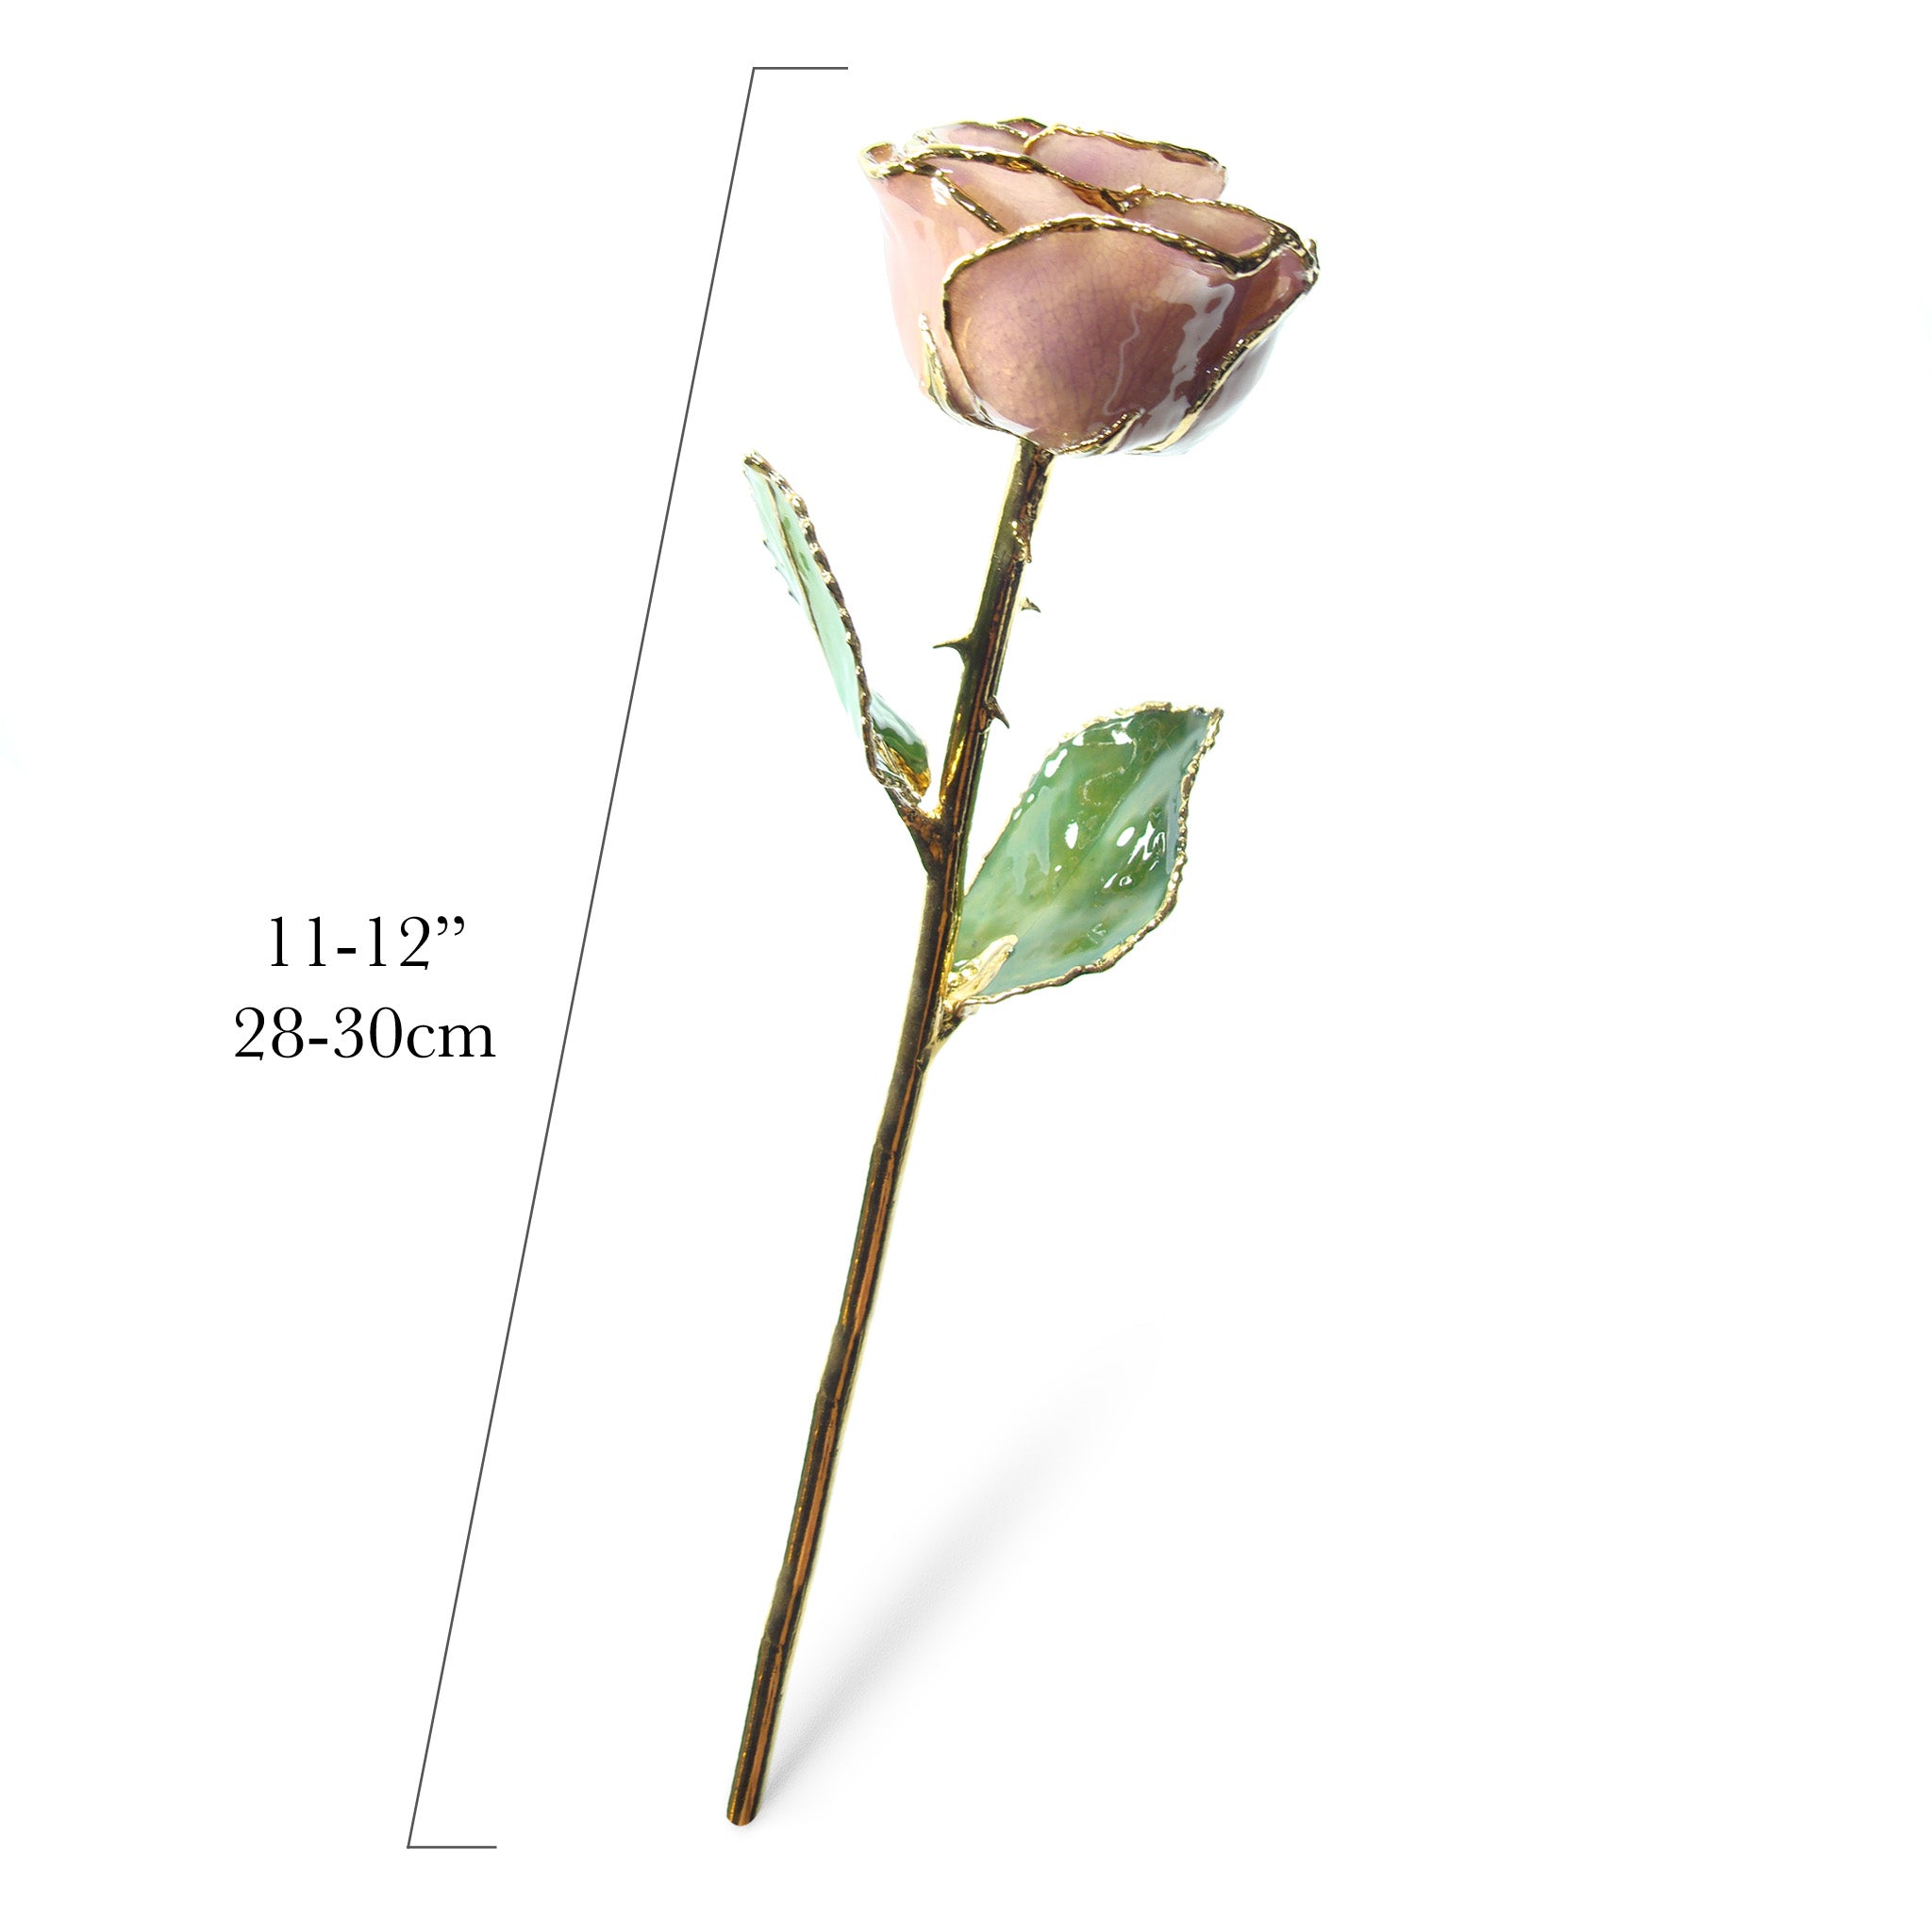 24K Gold Trimmed Forever Rose with Lavender Petals which are a light pink or purple color. View of Stem, Leaves, and Rose Petals and Showing Detail of Gold Trim showing measurements